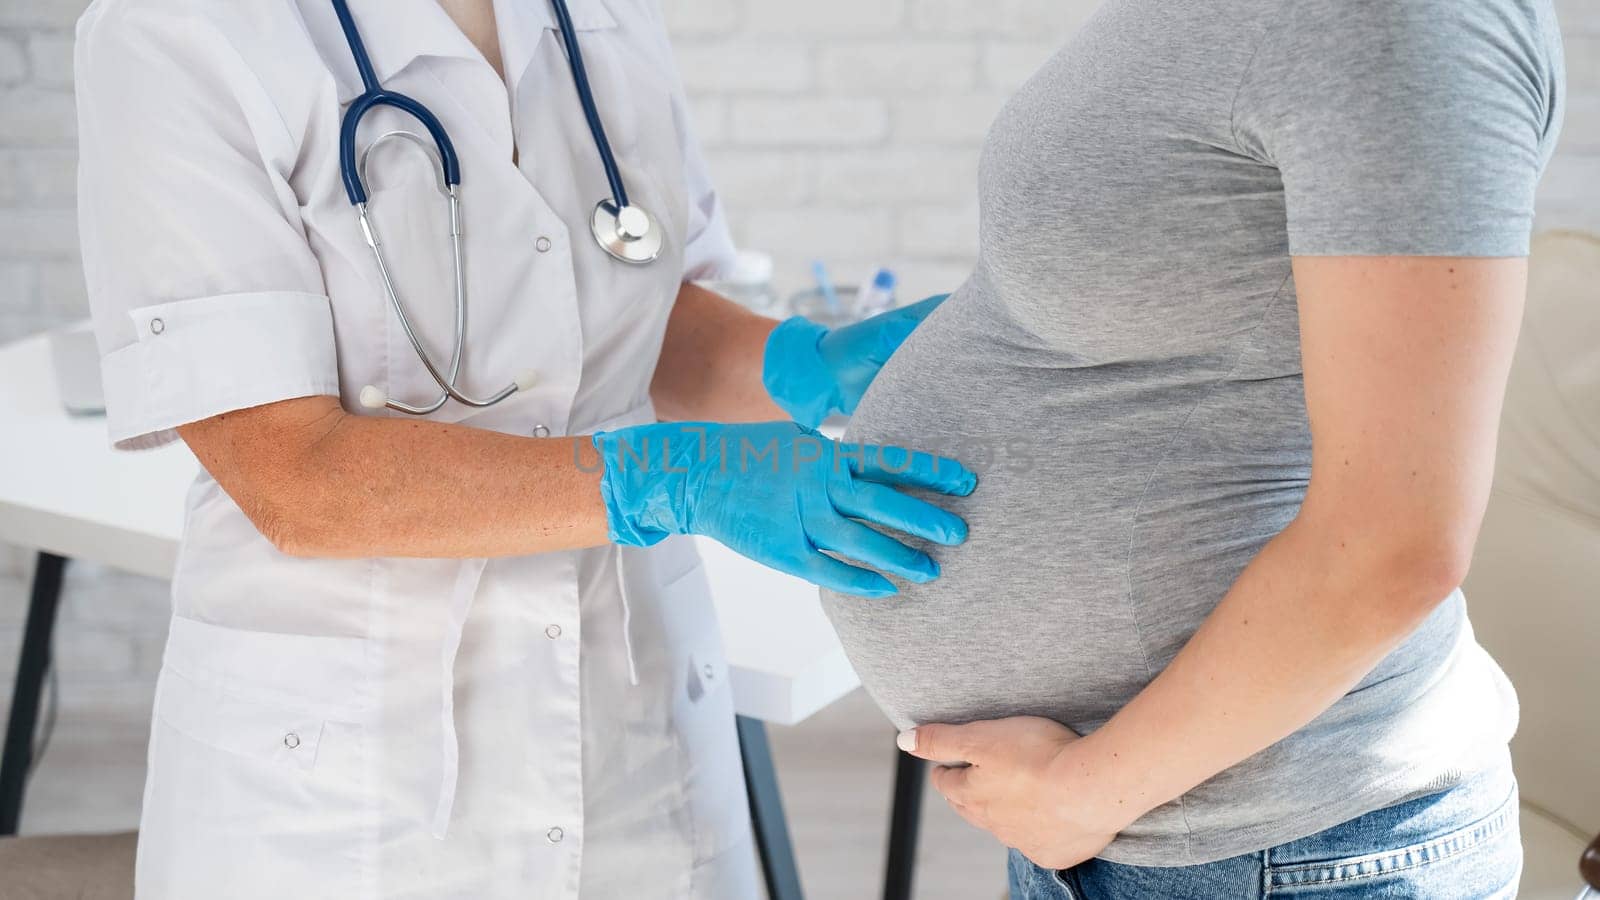 Pregnant woman visiting a doctor. Elderly Caucasian female gynecologist holds hands on the tummy of a pregnant patient